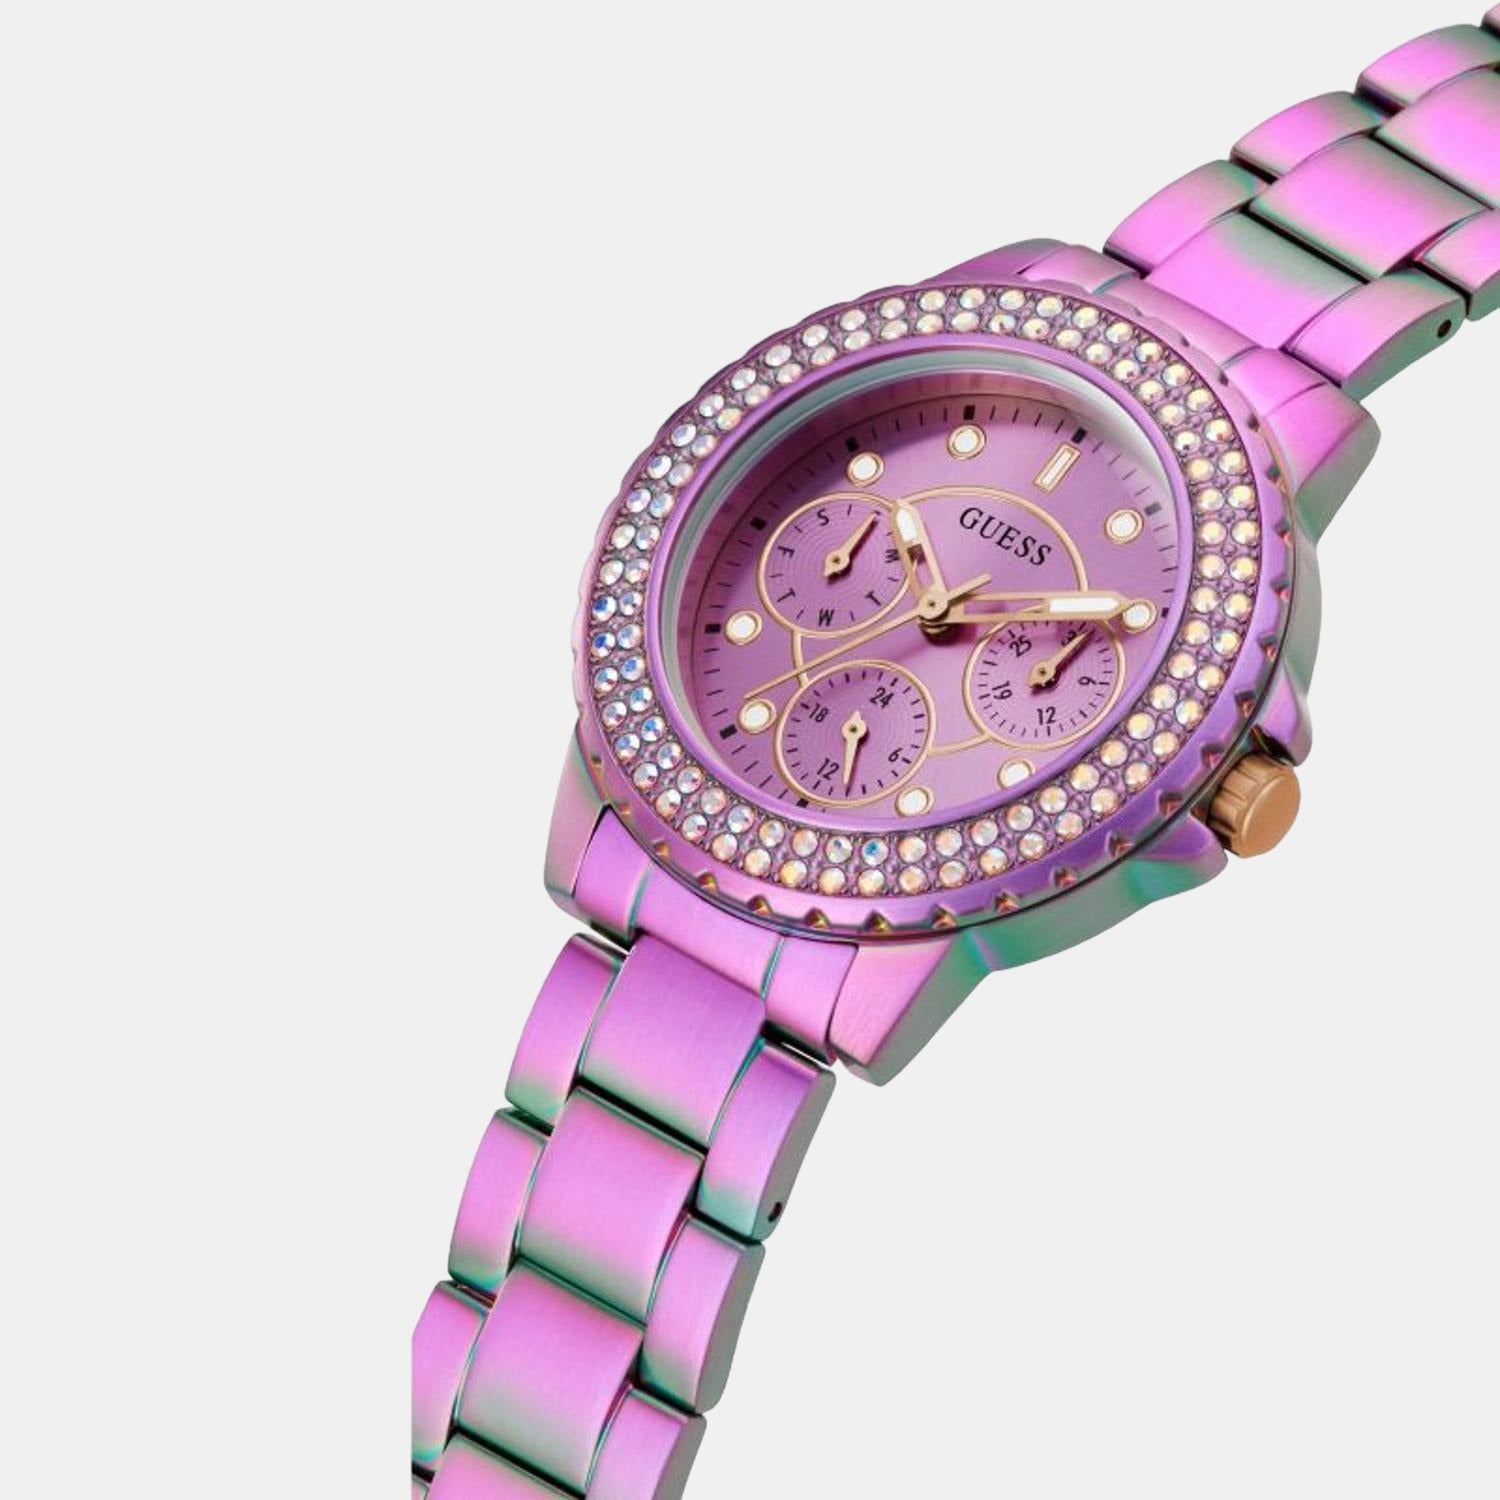 Parchie Pal | Parchie is a kid's watch brand dedicated to fun!